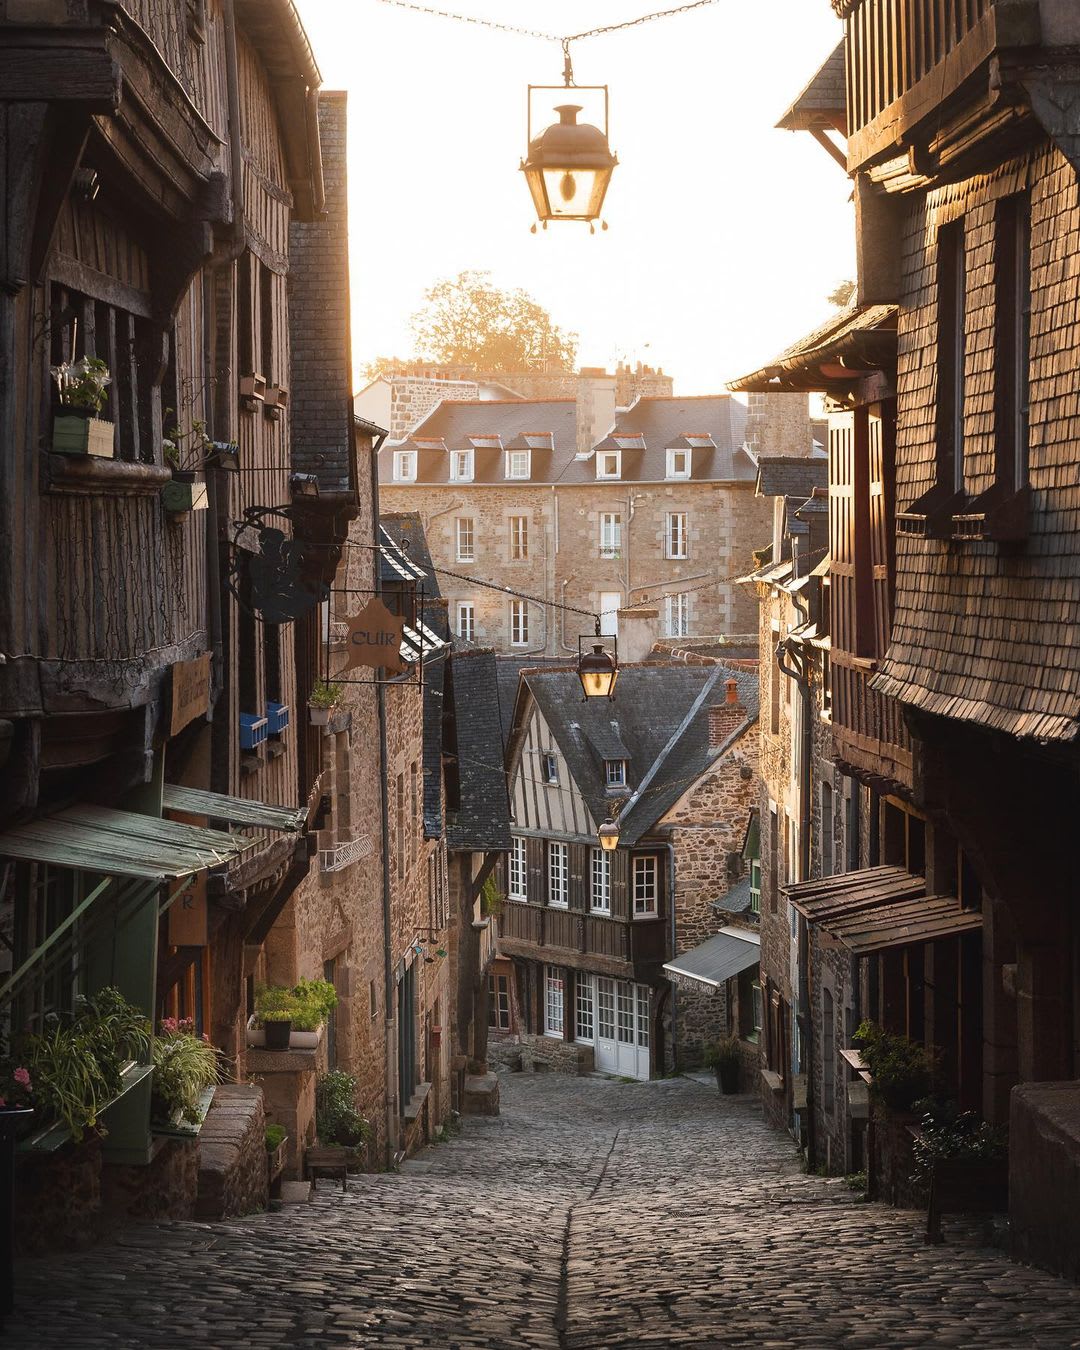 Morning sunlight over a cobblestone street in the medieval walled town of Dinan, Brittany, France.